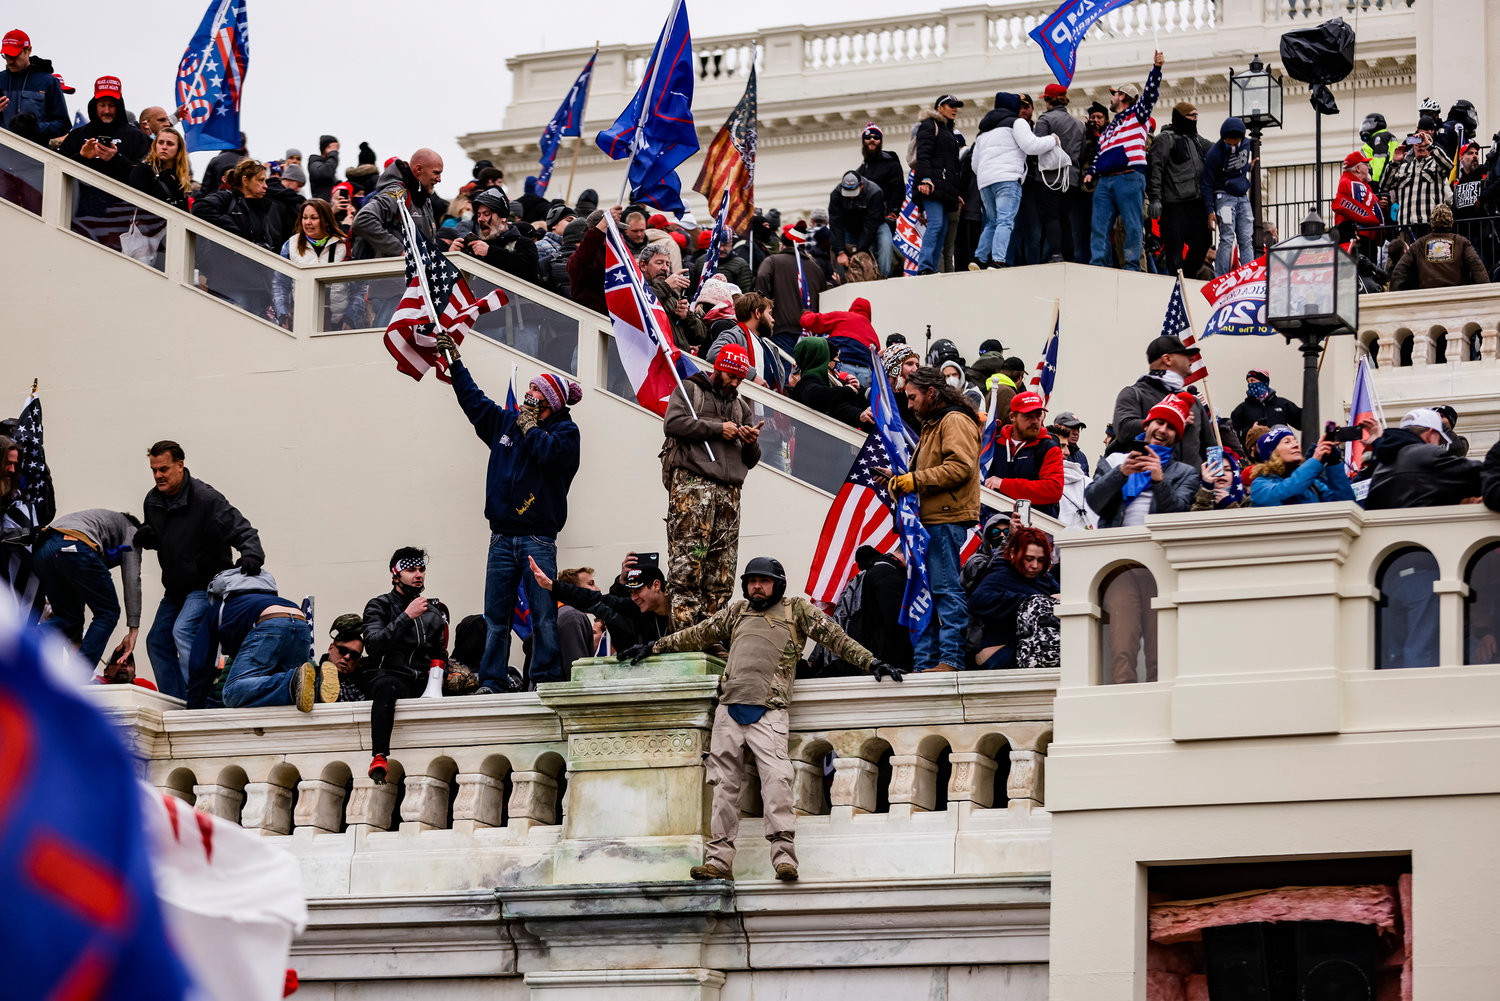 Pro-Trump supporters storm the U.S. Capitol following a rally with President Donald Trump on Jan. 6, 2021, in Washington, D.C. Federal officials expect that the number of rioters prosecuted could roughly double, with this month marking the 1,000th arrest, according to statistics from the U.S. attorney’s office. (Samuel Corum/Getty Images/TNS)